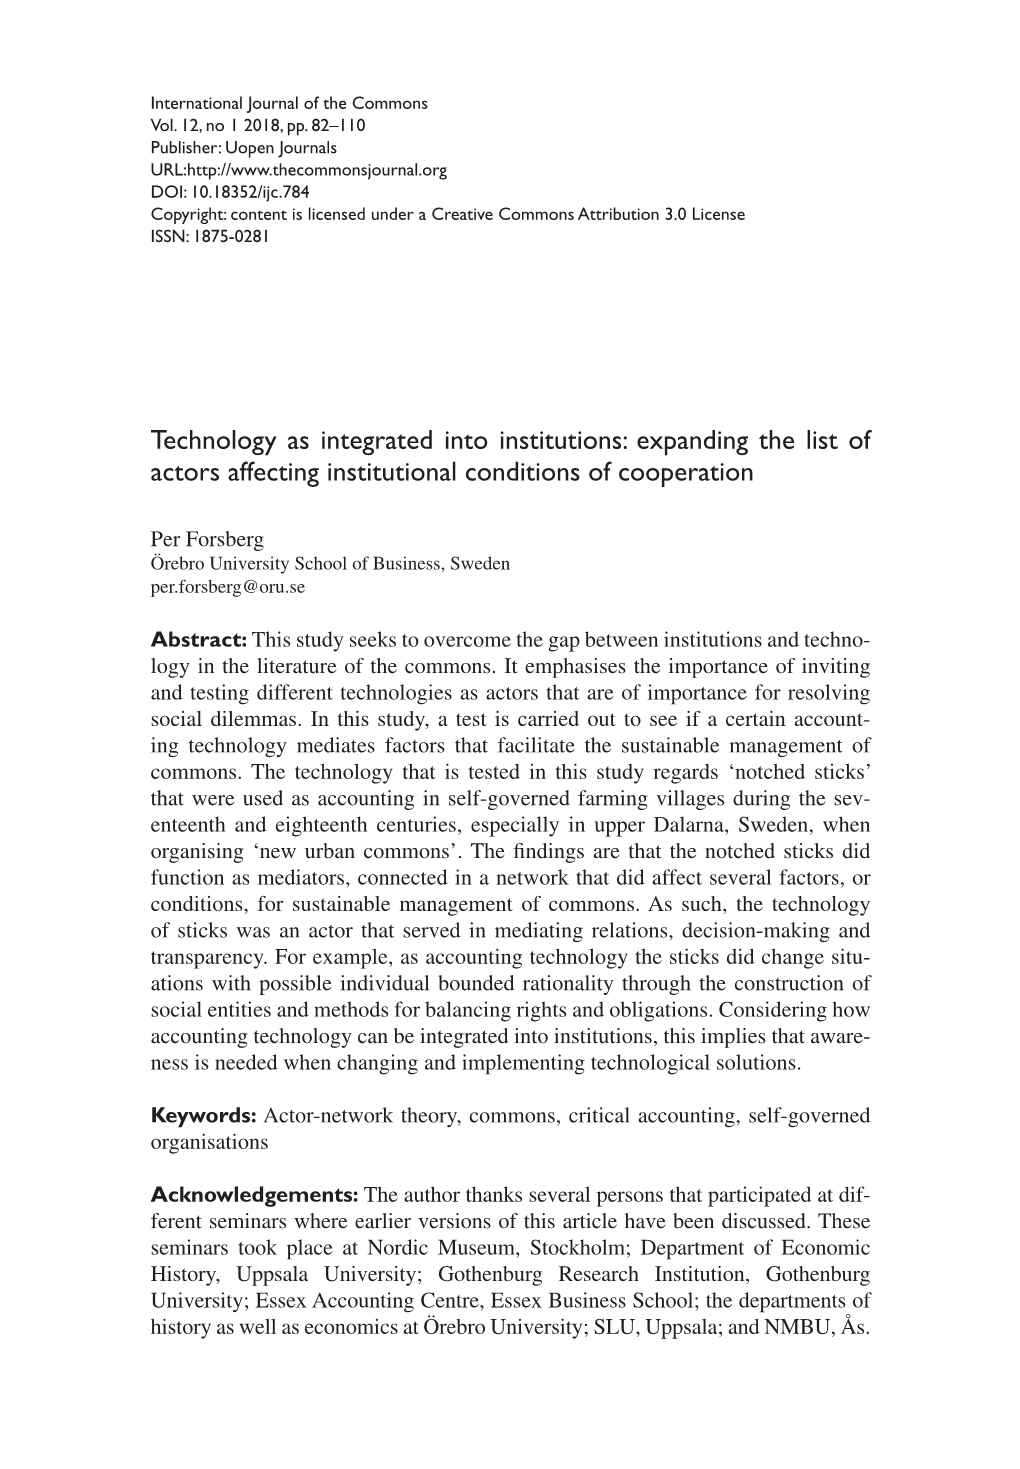 Technology As Integrated Into Institutions: Expanding the List of Actors Affecting Institutional Conditions of Cooperation